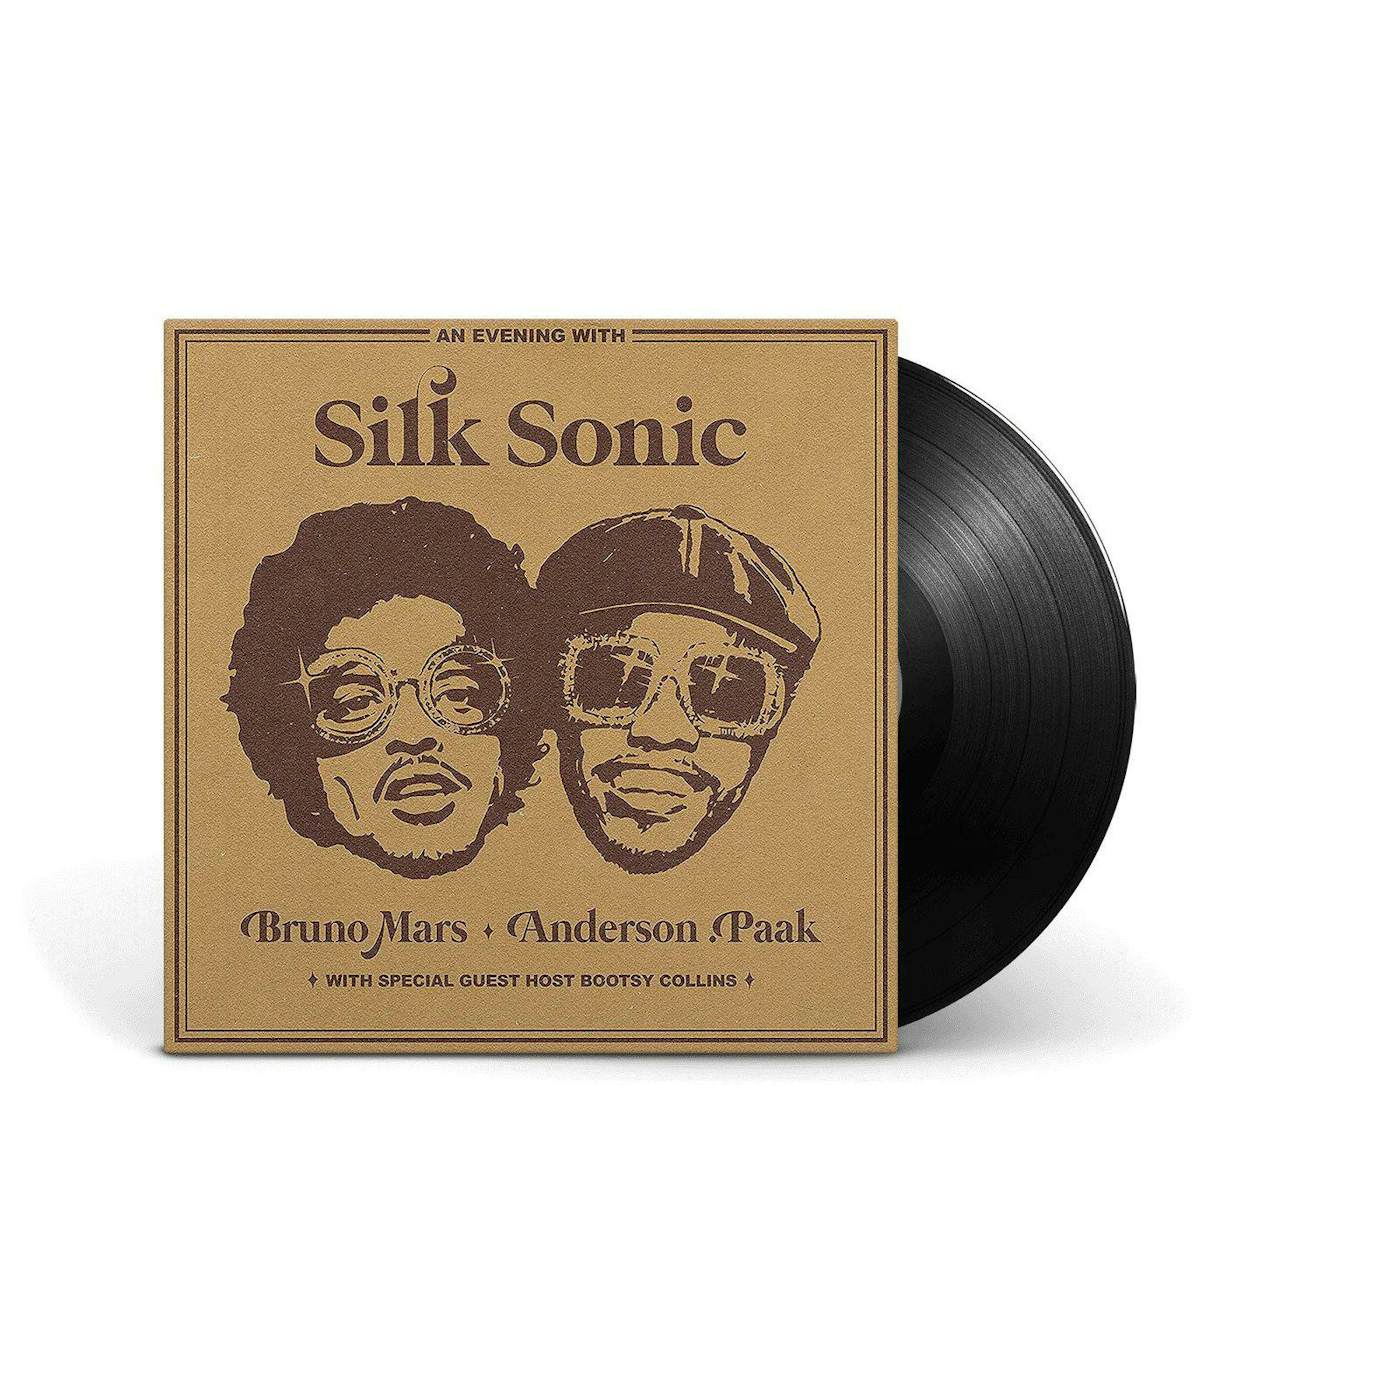 Bruno Mars / Anderson .Paak / Silk Sonic An Evening With Silk Sonic Vinyl Record